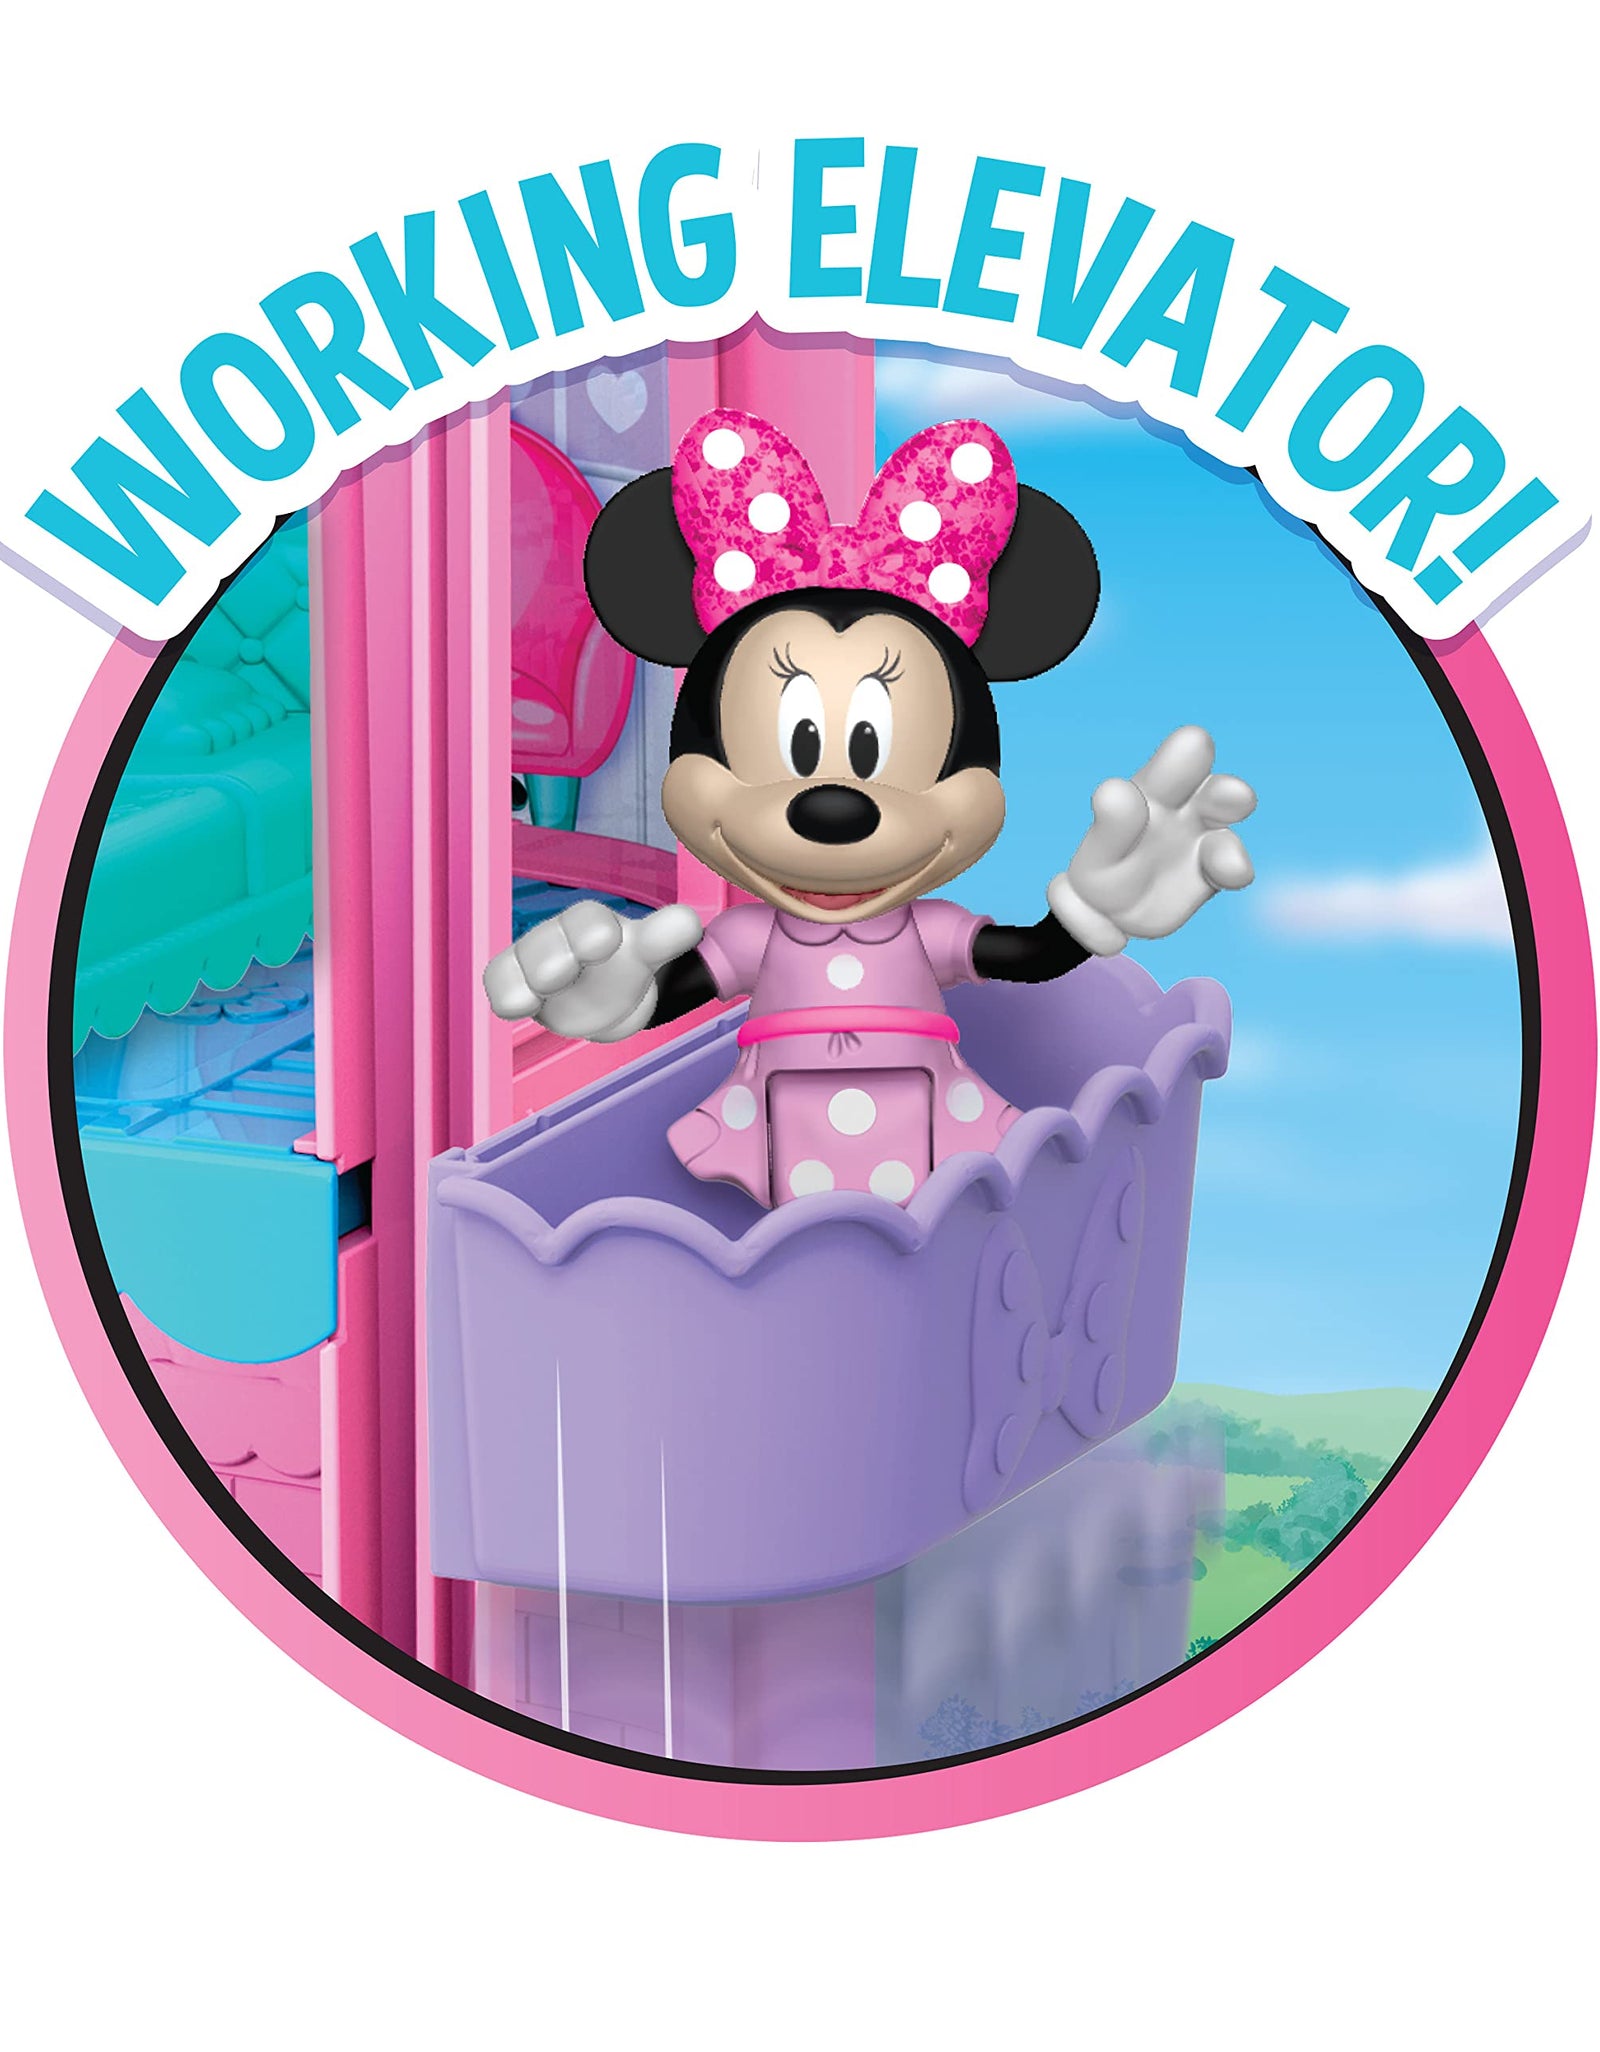 Minnie Mouse Bow-Tel Hotel, 2-Sided Playset with Lights, Sounds, and Elevator, 20 Pieces, Includes Minnie Mouse, Daisy Duck, and Snowpuff Figures, by Just Play